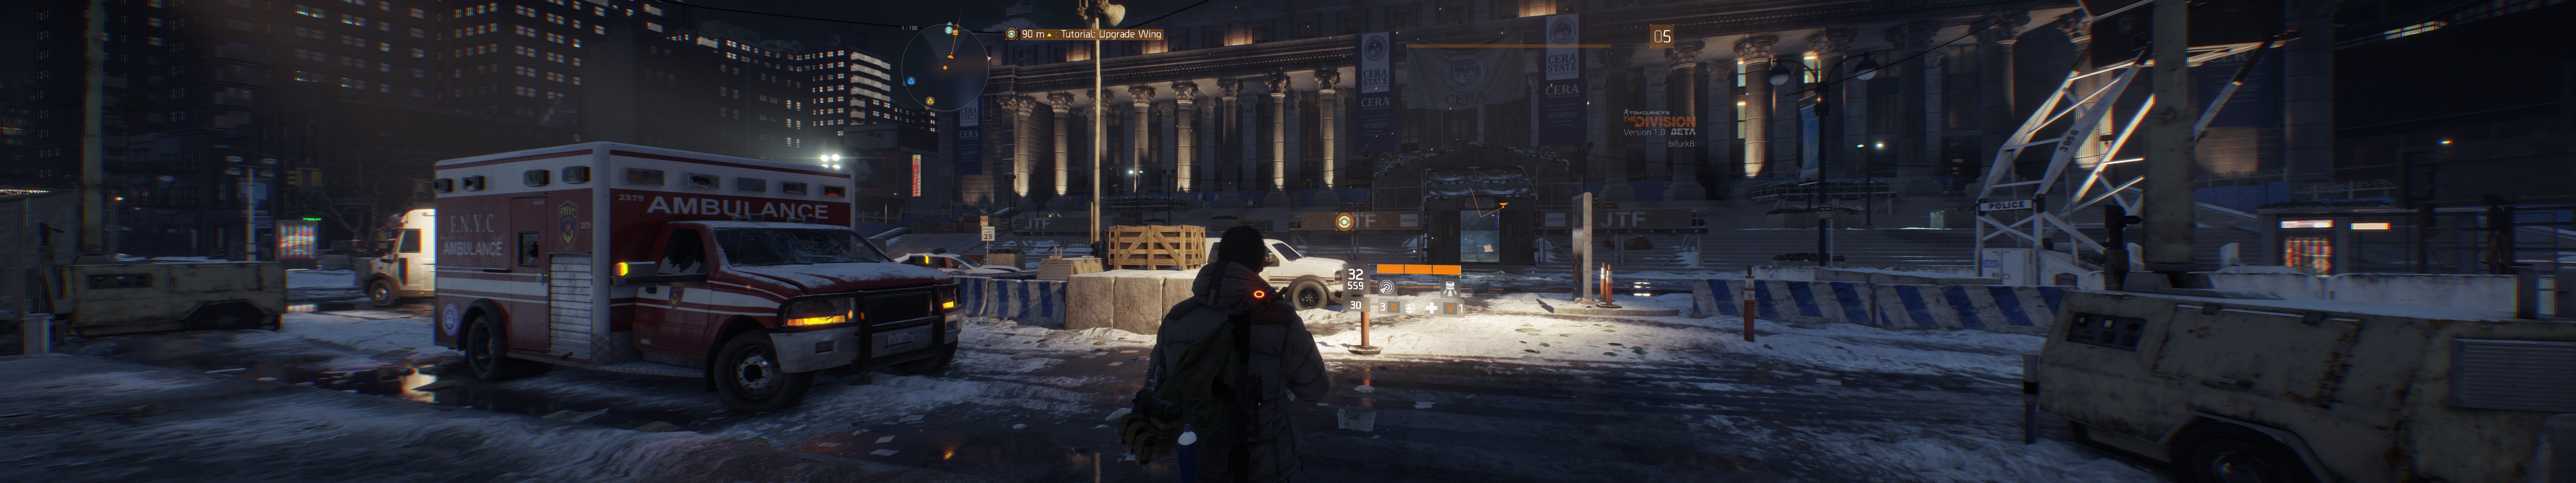 The Division Dual Monitor Wallpapers